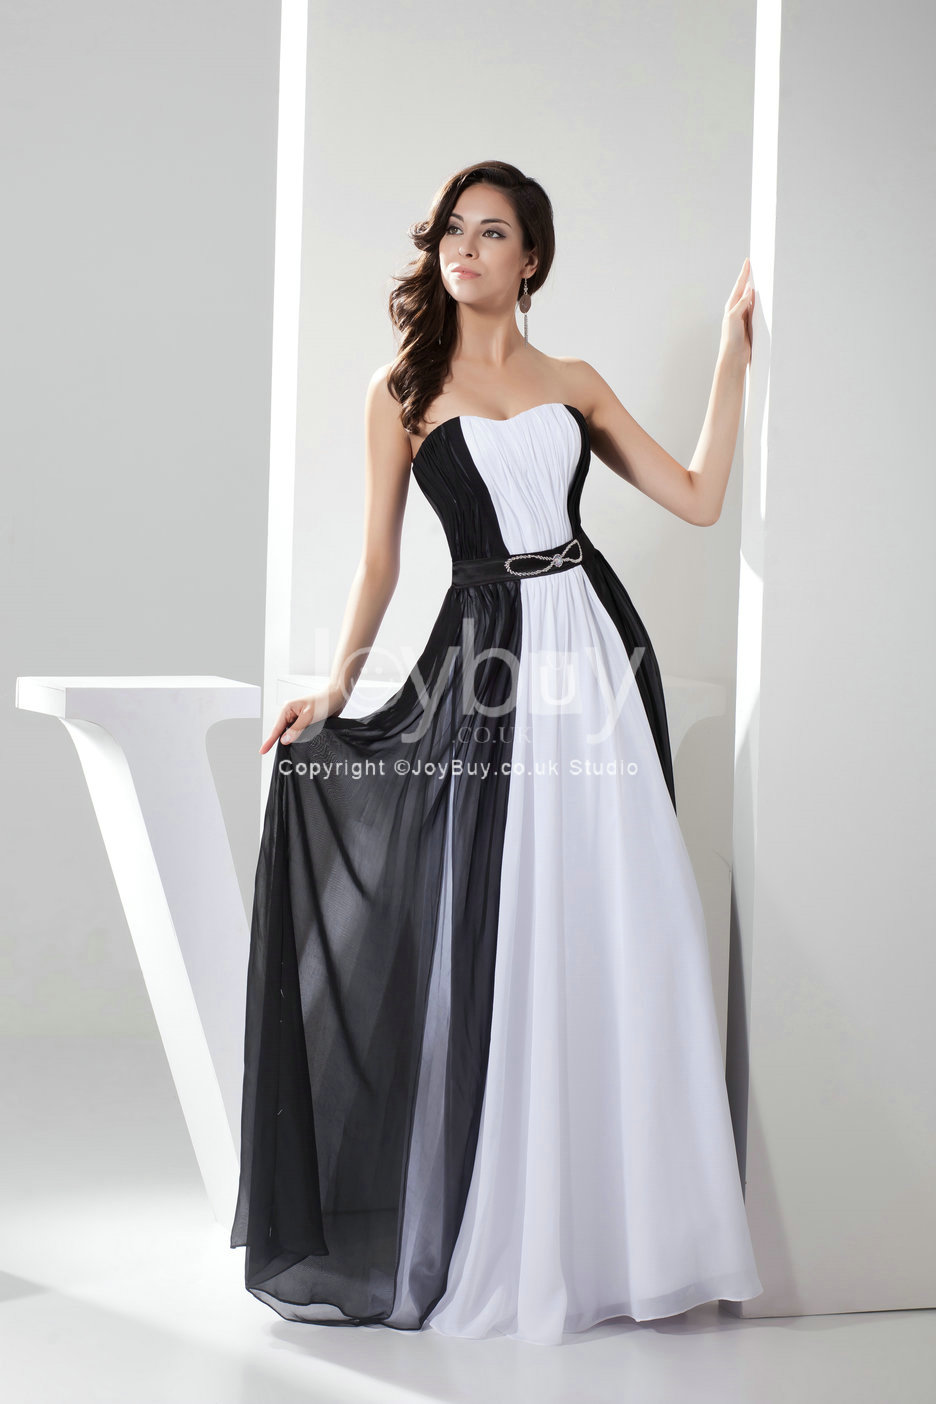 Black And White Full Length Dress And 10 Great Ideas